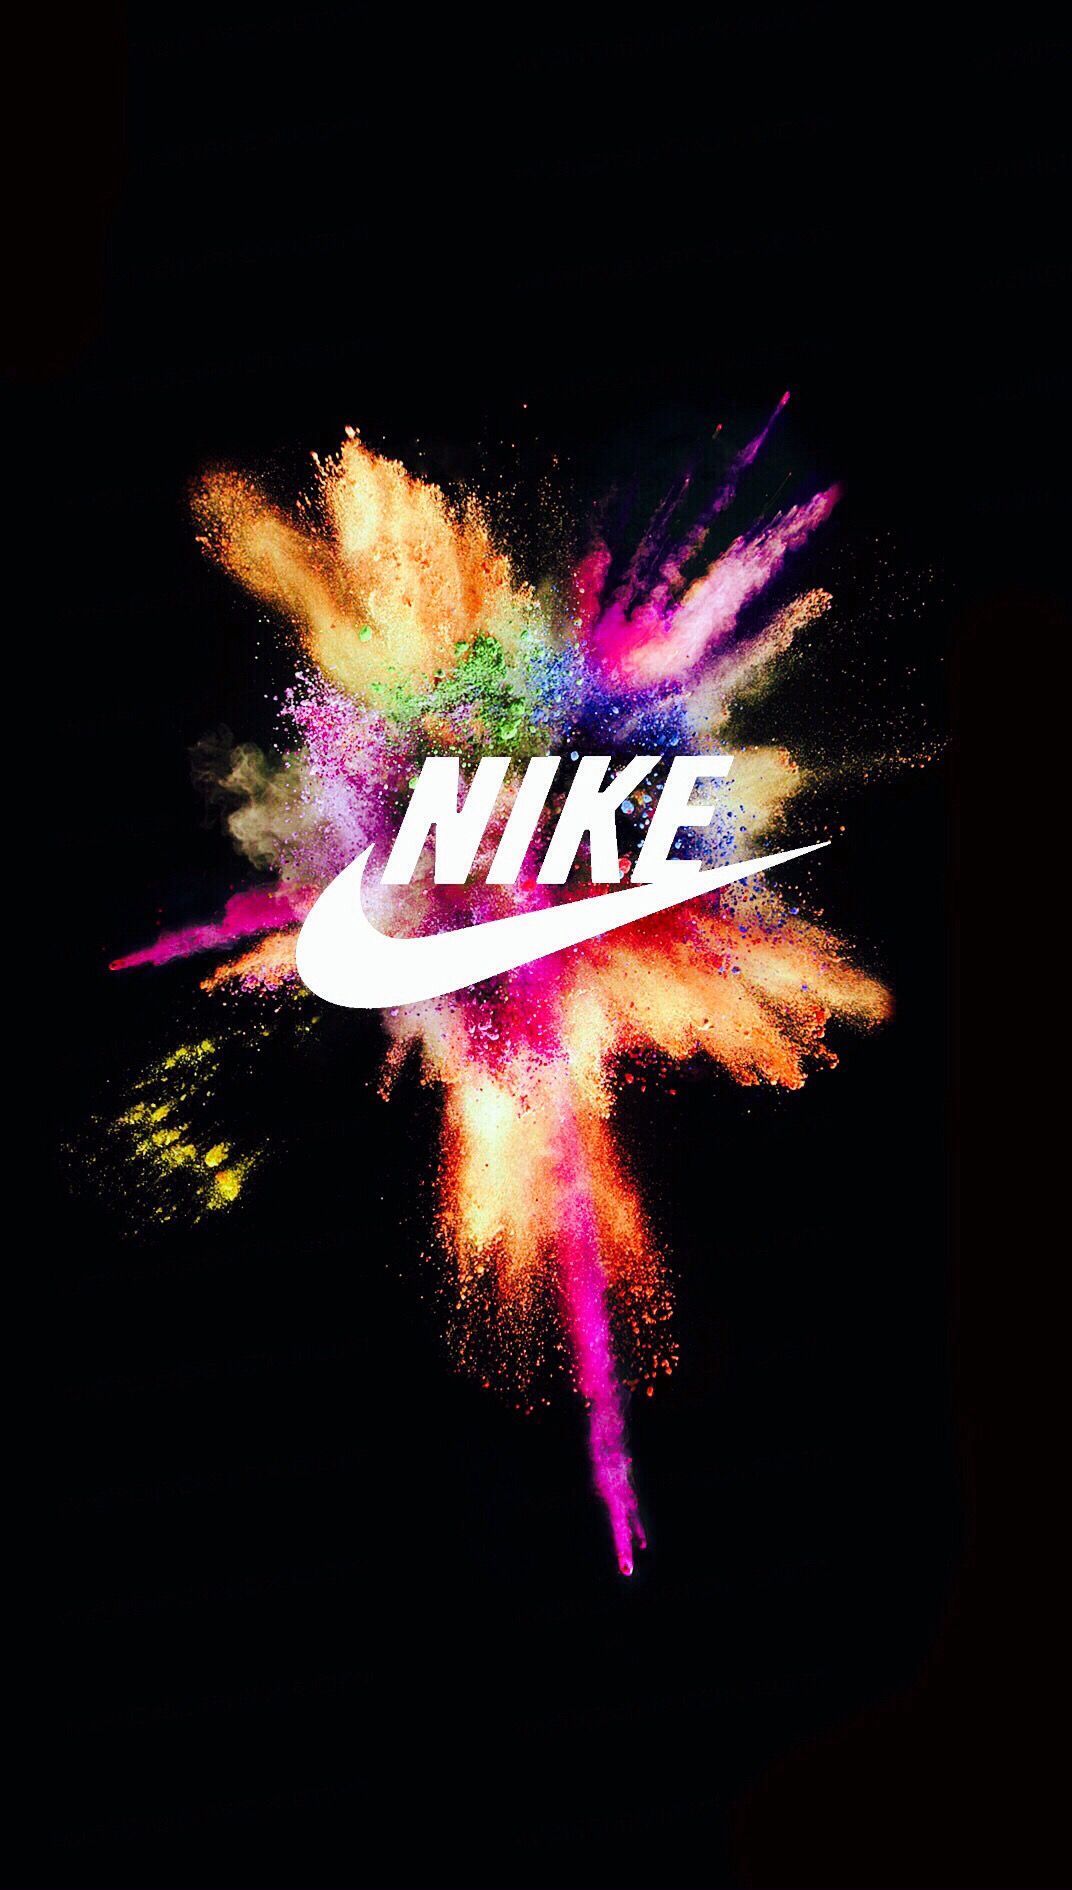 iPhone wallpaper. Nike, Wallpaper quotes, Neon signs